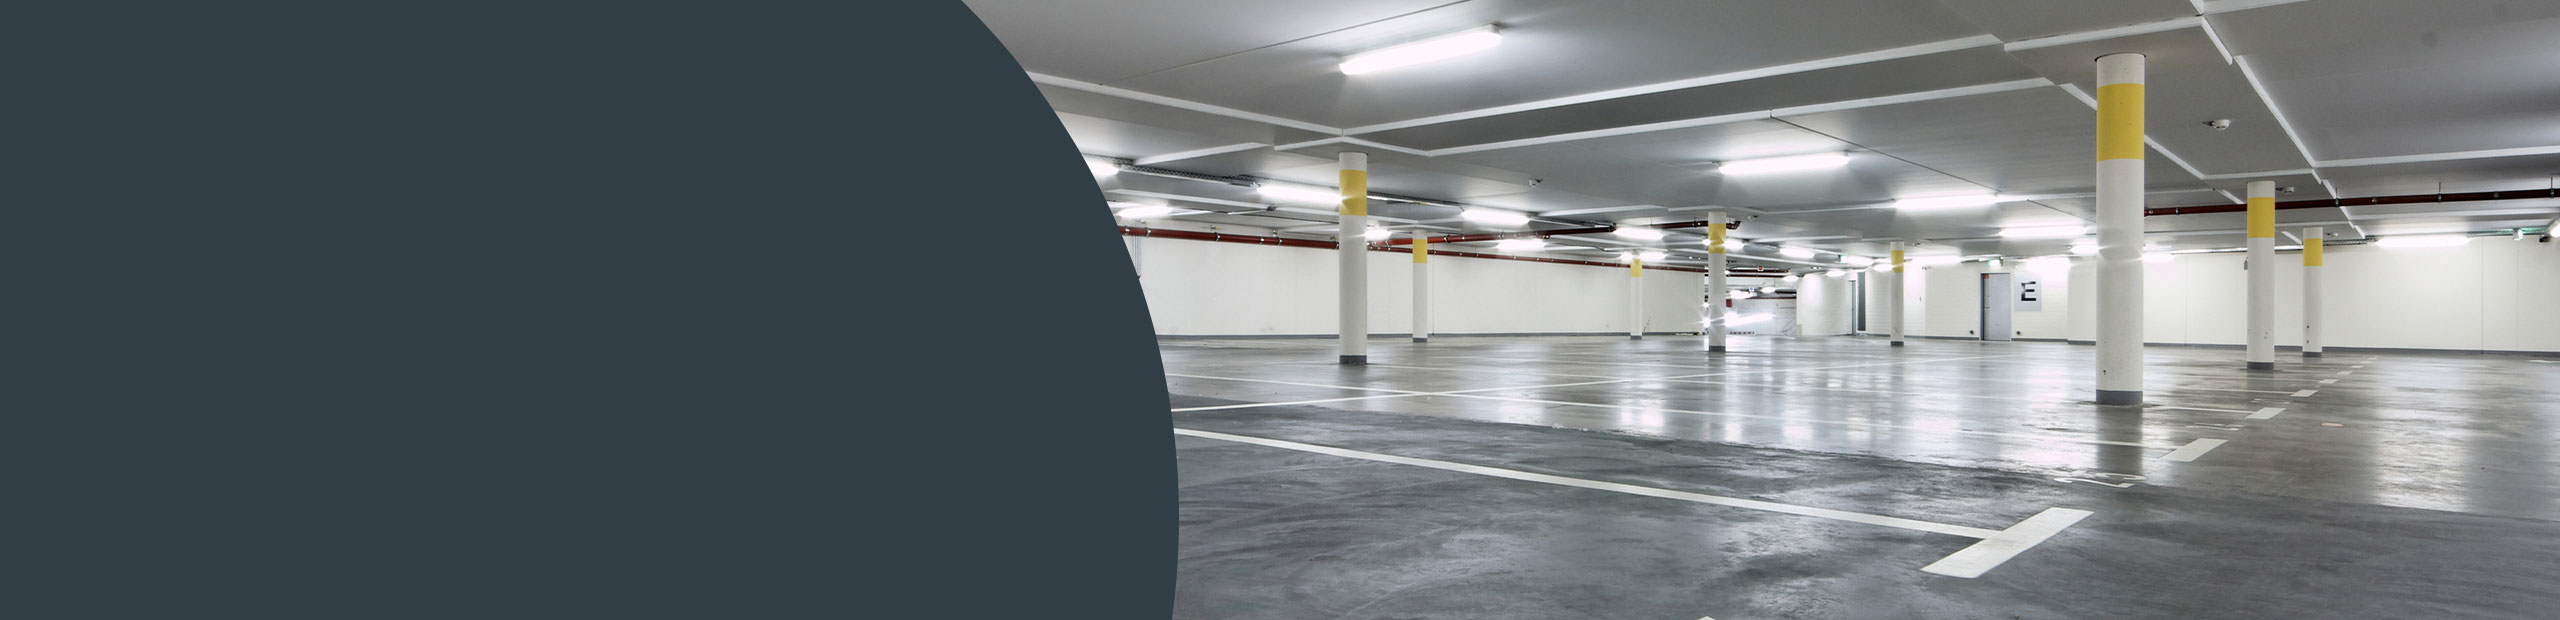 Car Parking Cleaning Specialists - Enfield